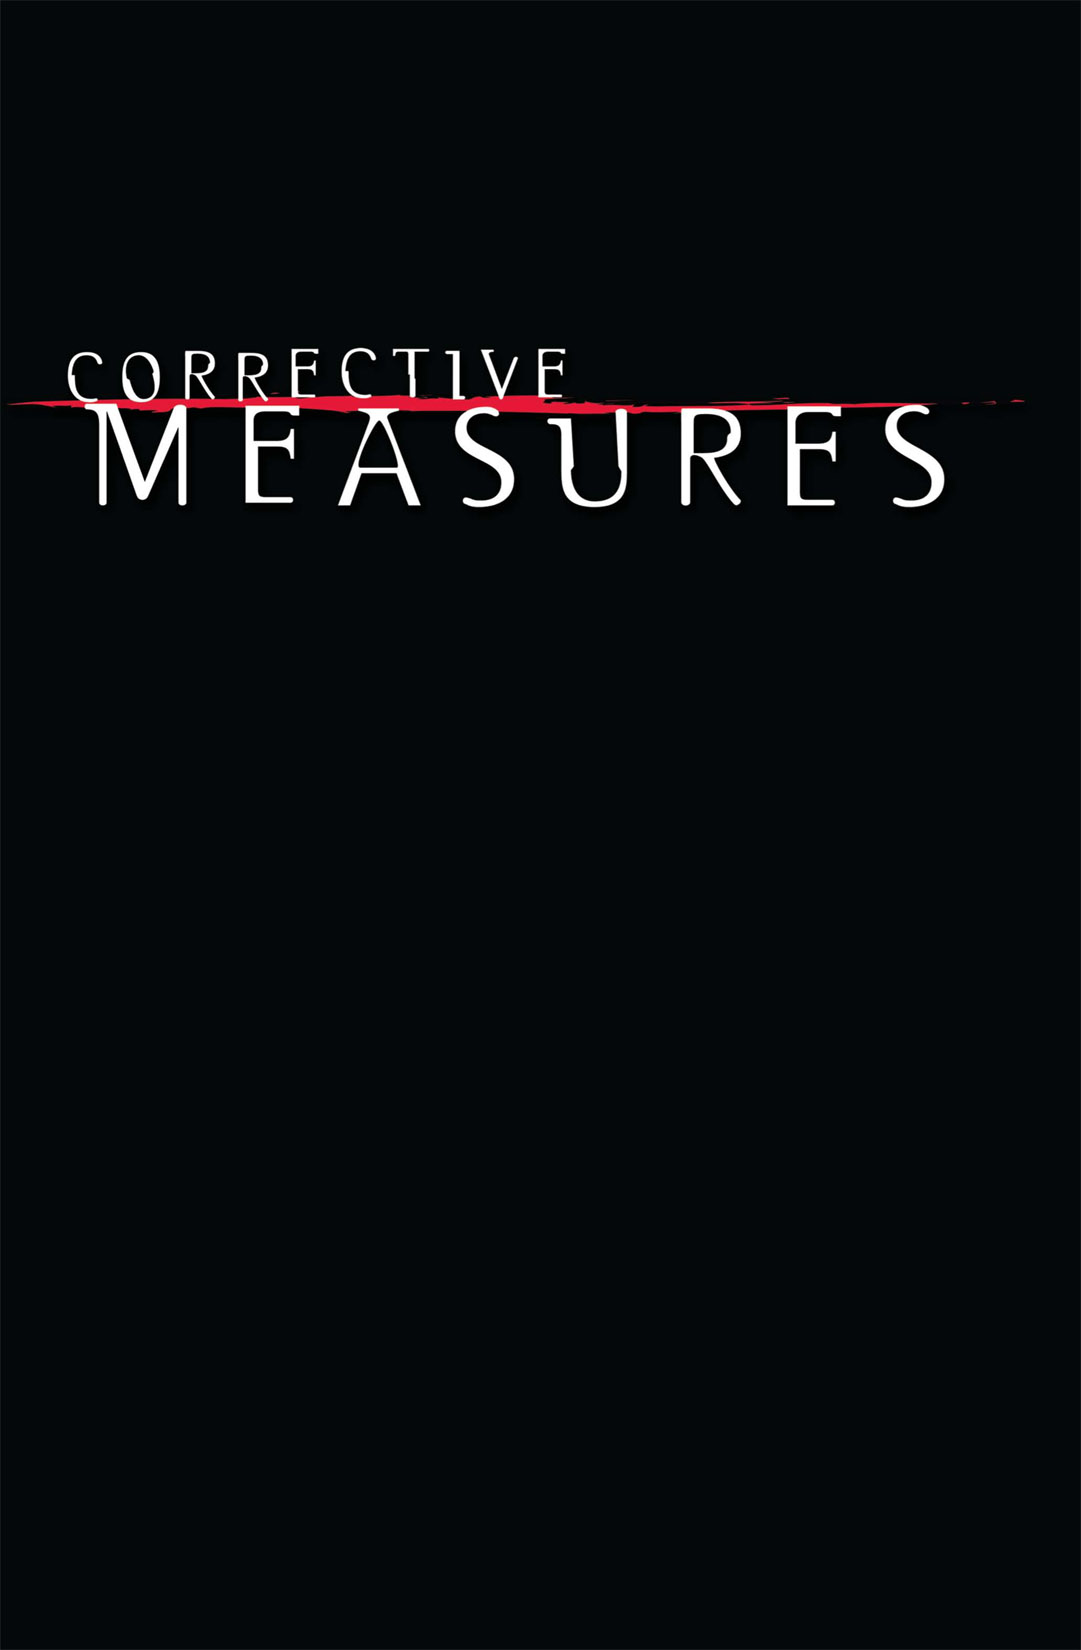 Read online Corrective Measures comic -  Issue # TPB 1 - 2